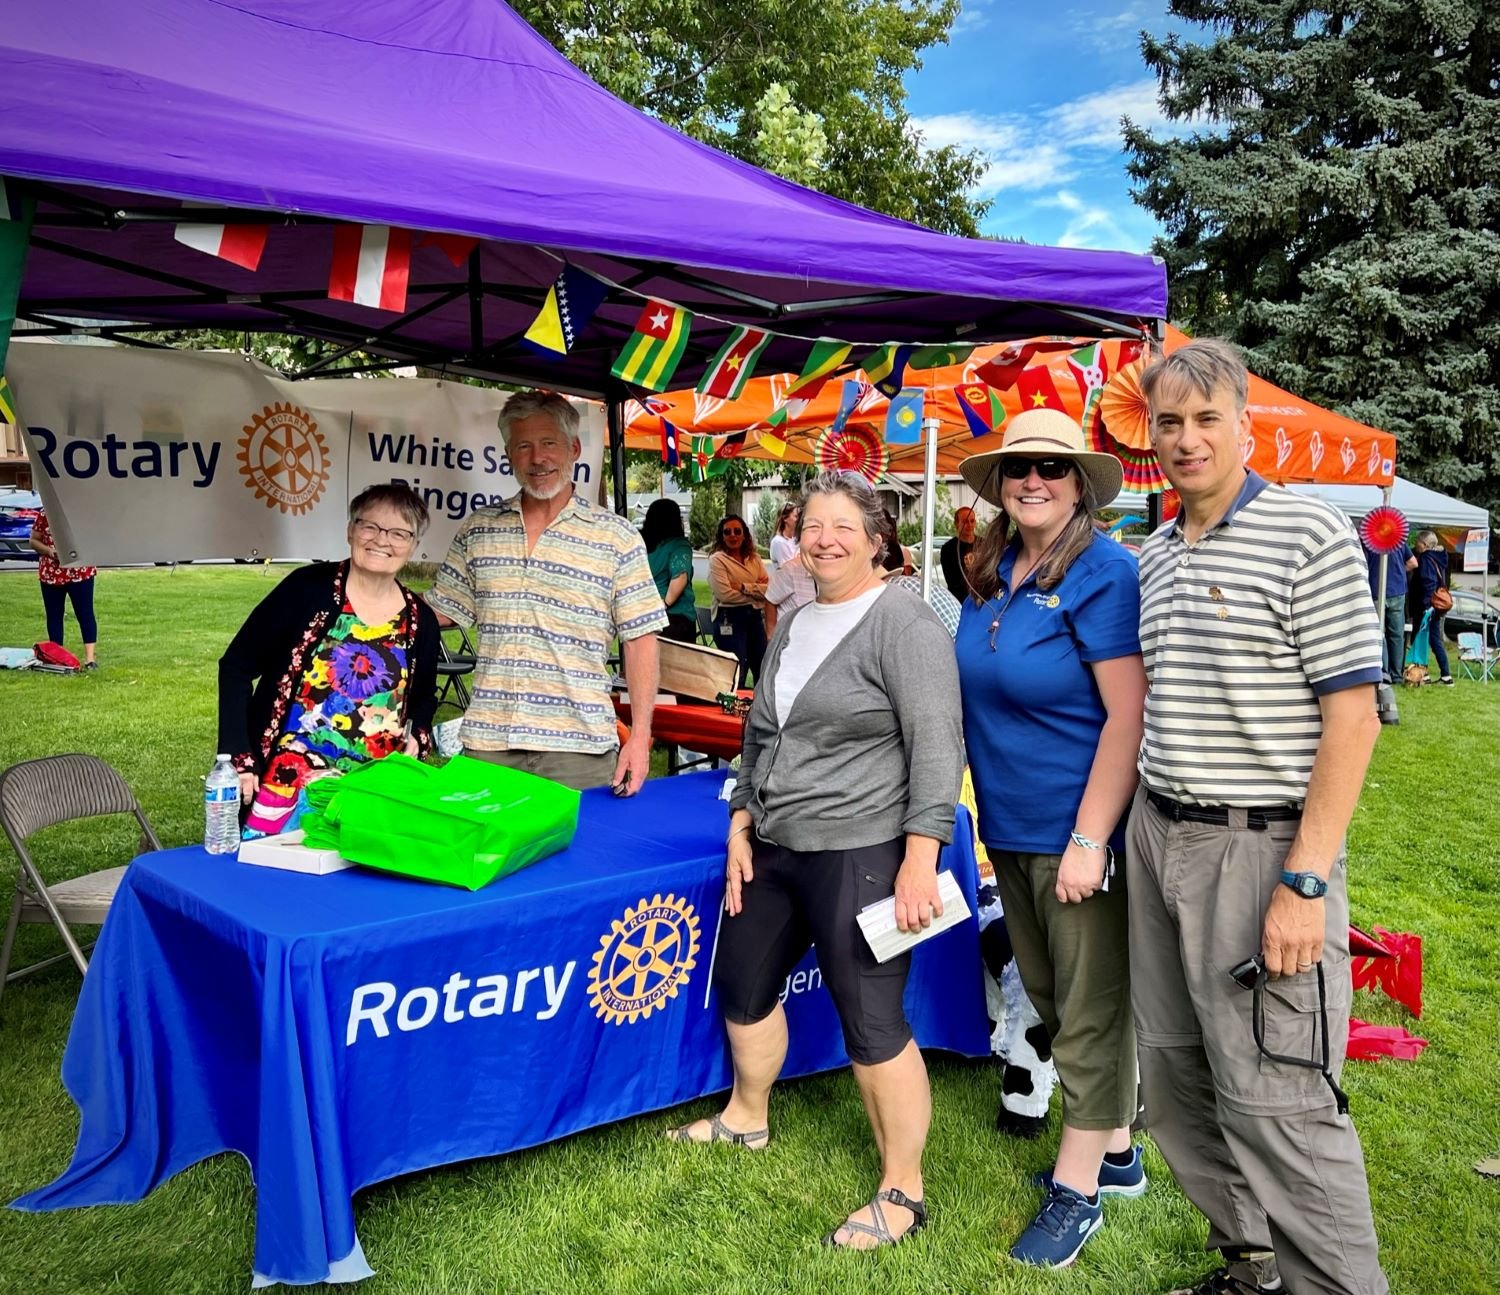 White Salmon-Bingen Rotary Club provided games and prizes for the kids, including&nbsp;lotería (Mexican bingo), puzzles, books, cornhole, badminton, and soccer.